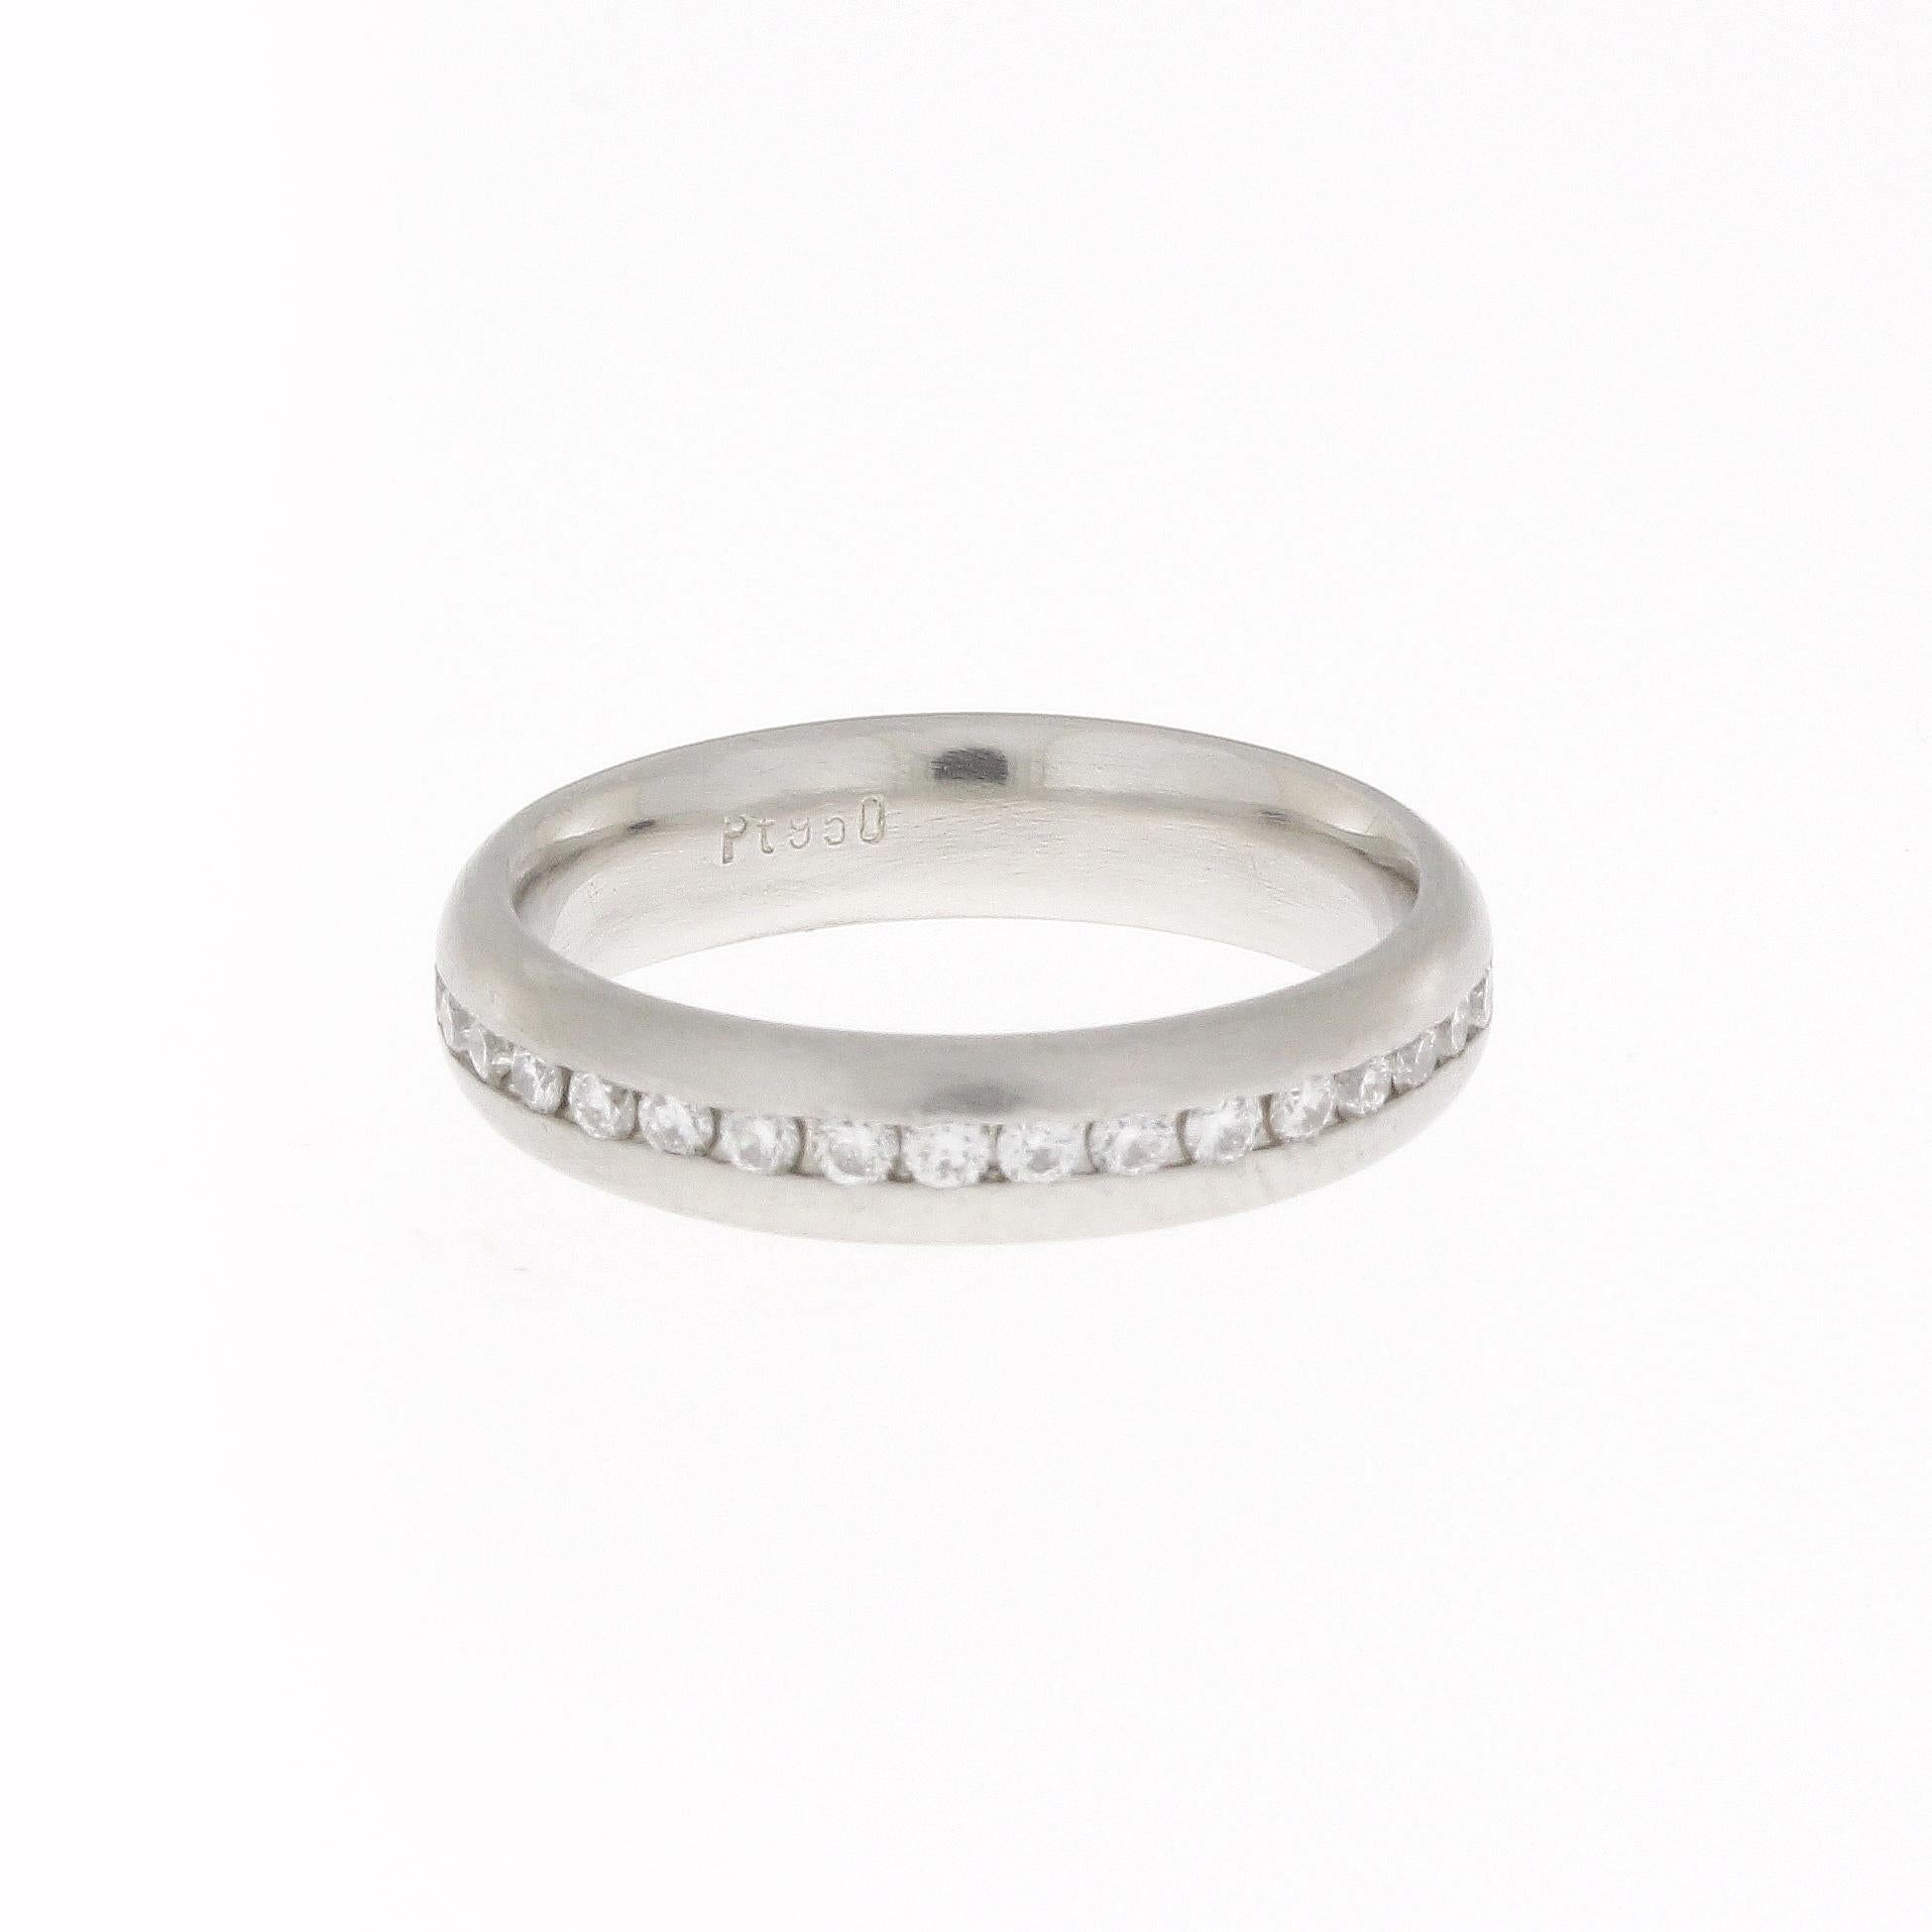 Platinum Eternity Band Bridal Ring with 34 Diamonds approx. 0.4 Carat 